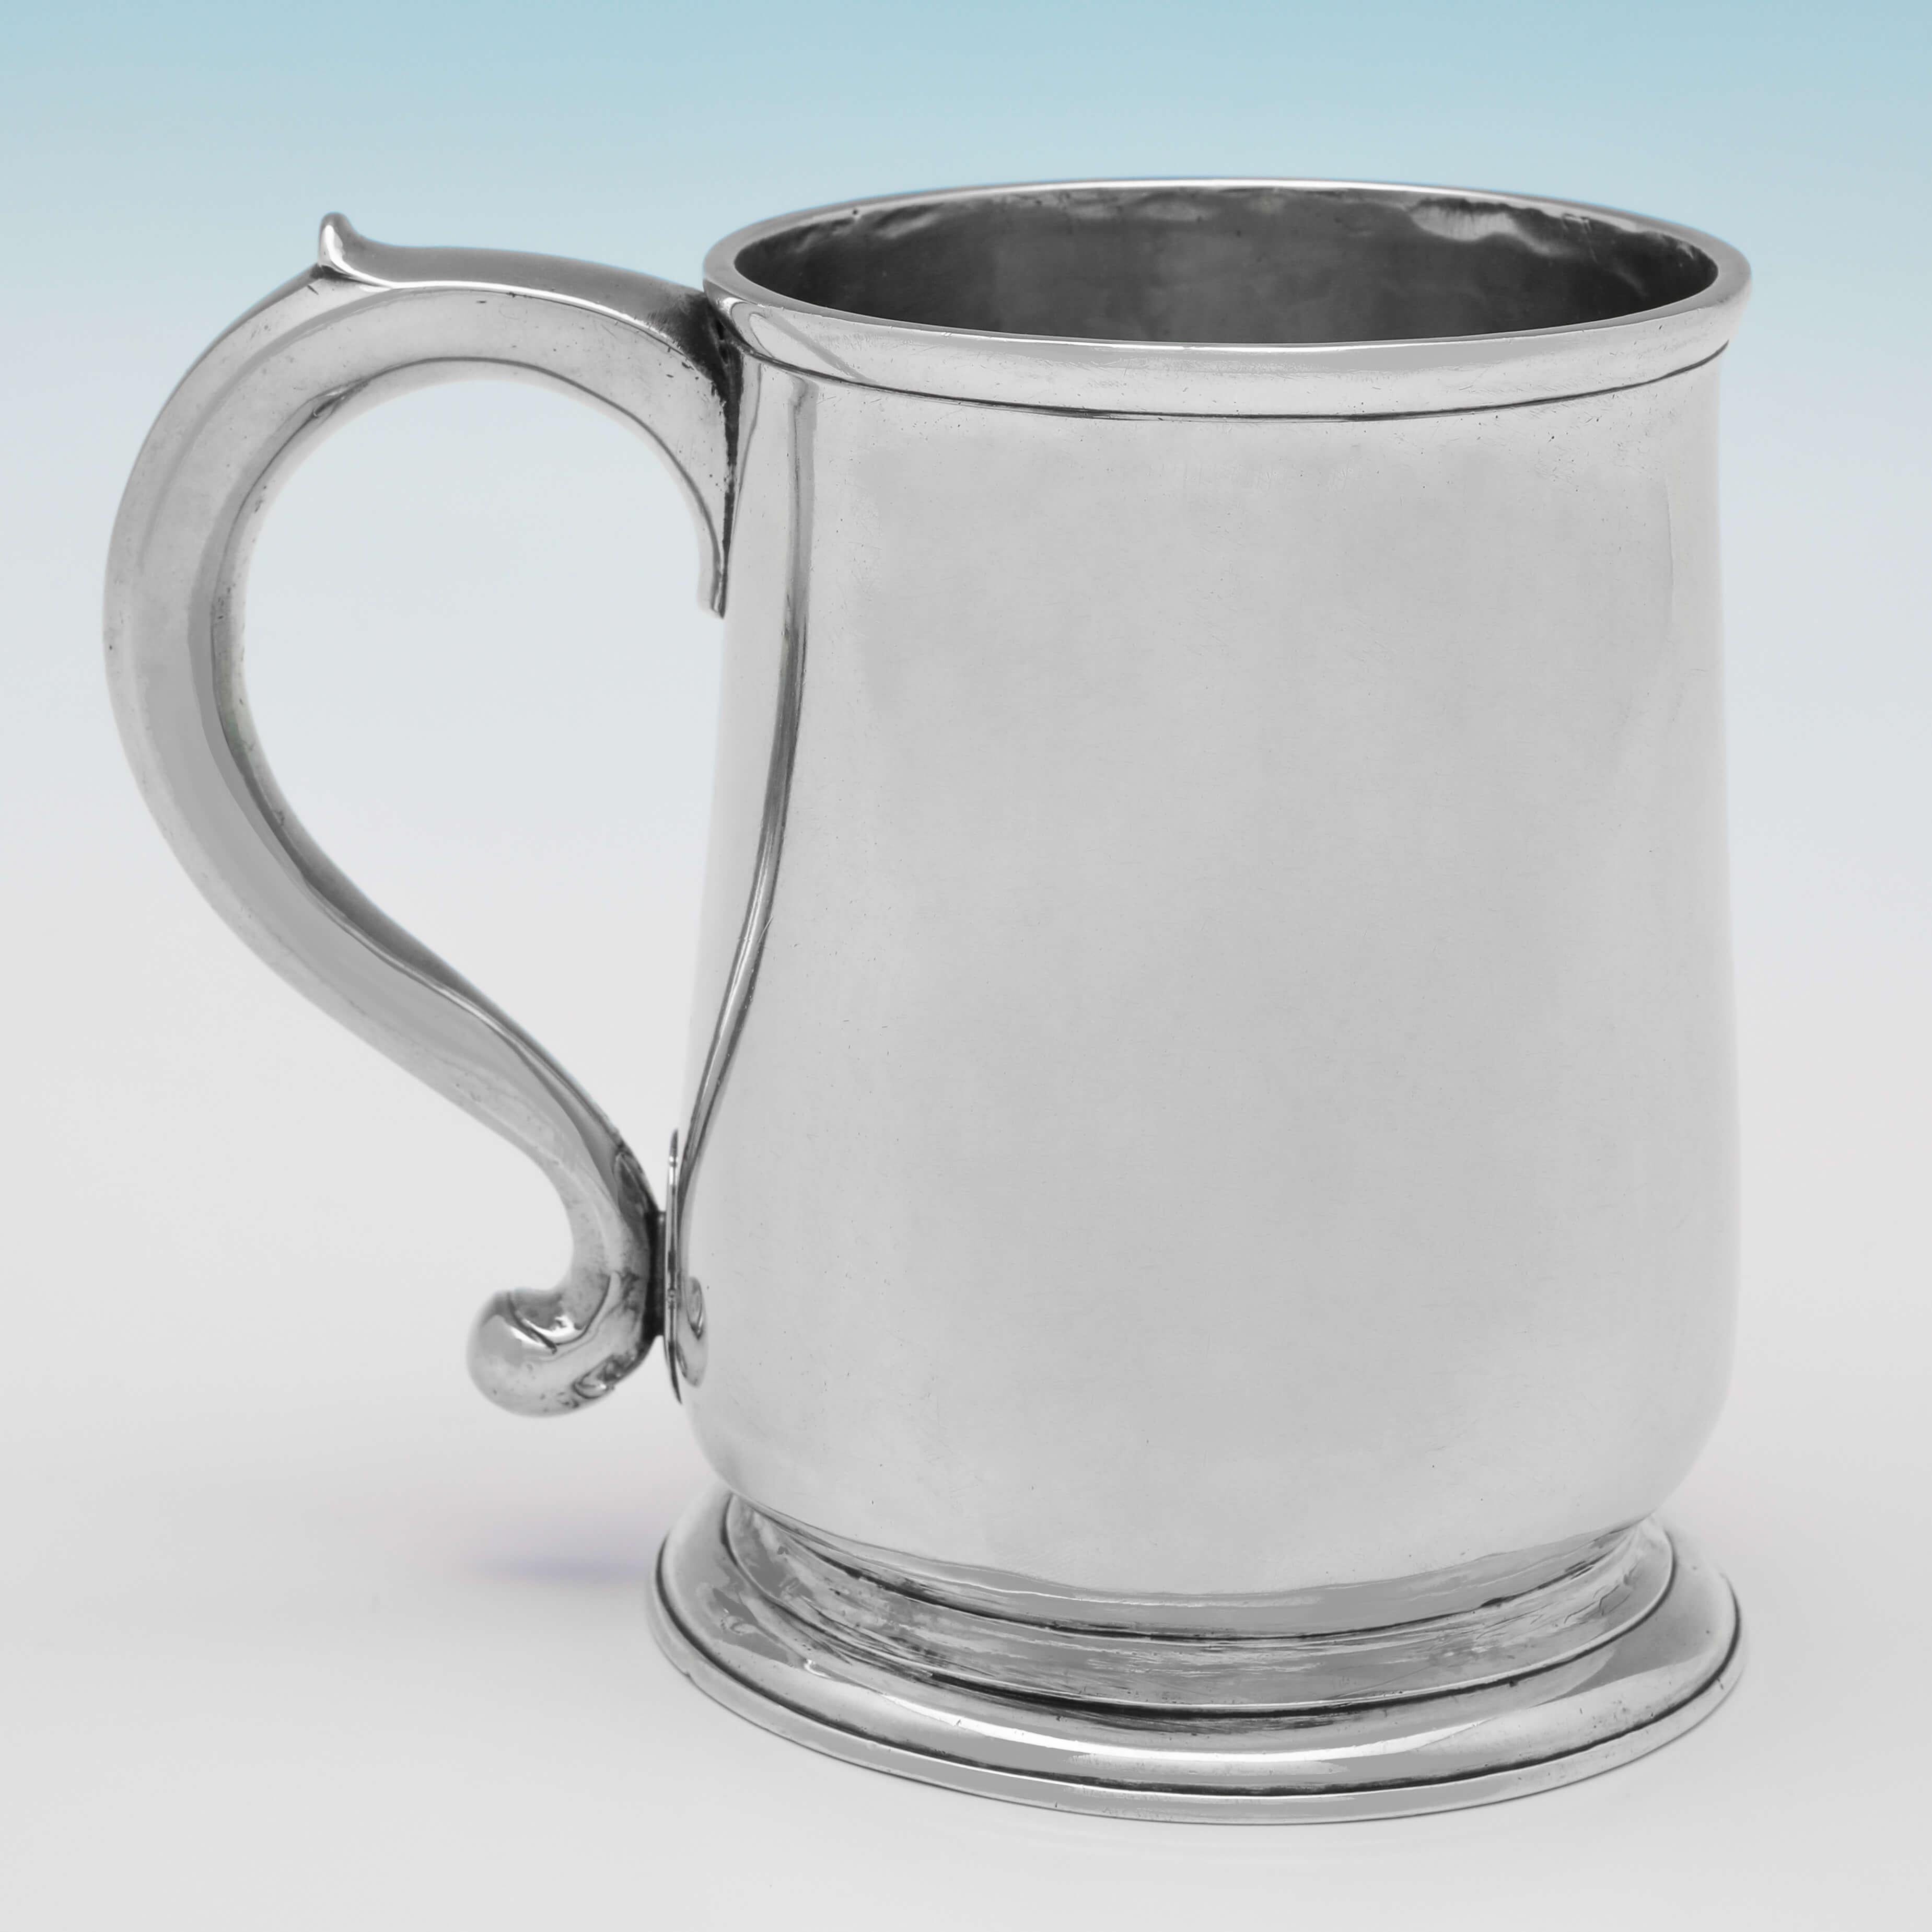 Hallmarked in London in 1727 by Richard Green, this handsome, George I, Antique Sterling Silver Mug, is plain in style, with reed detailing around the foot and rim. The mug measures 4.5